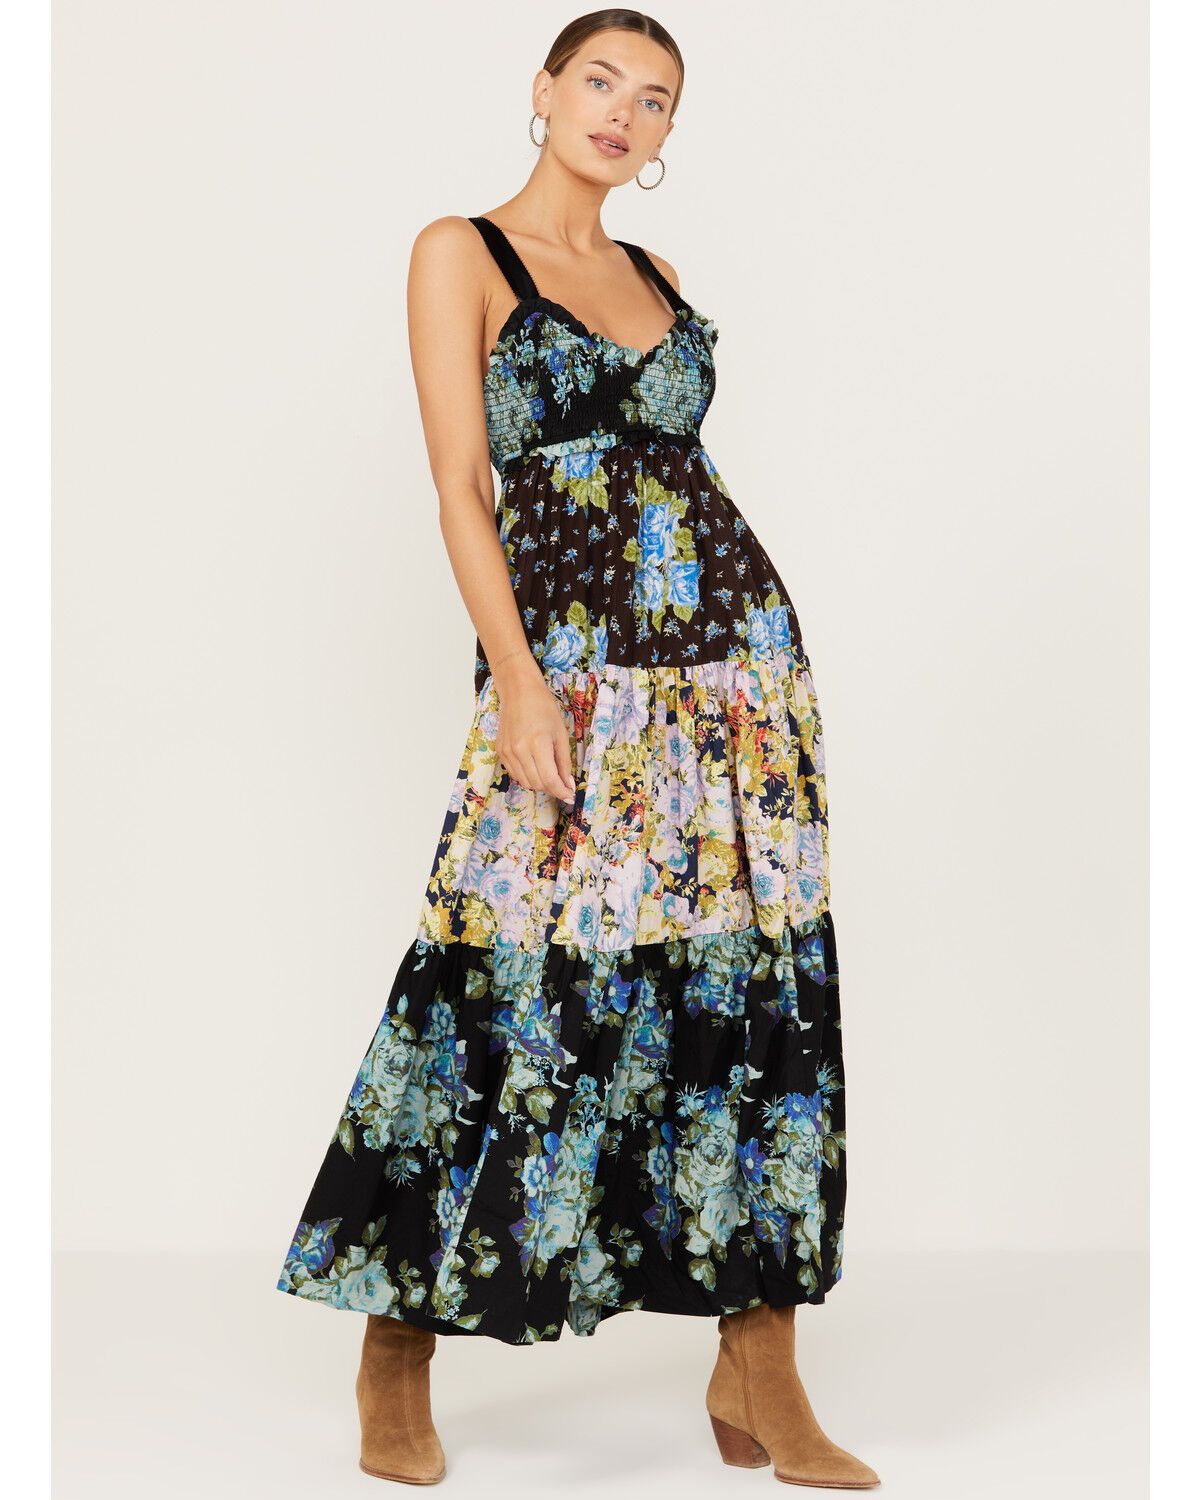 free people.bluebell dress